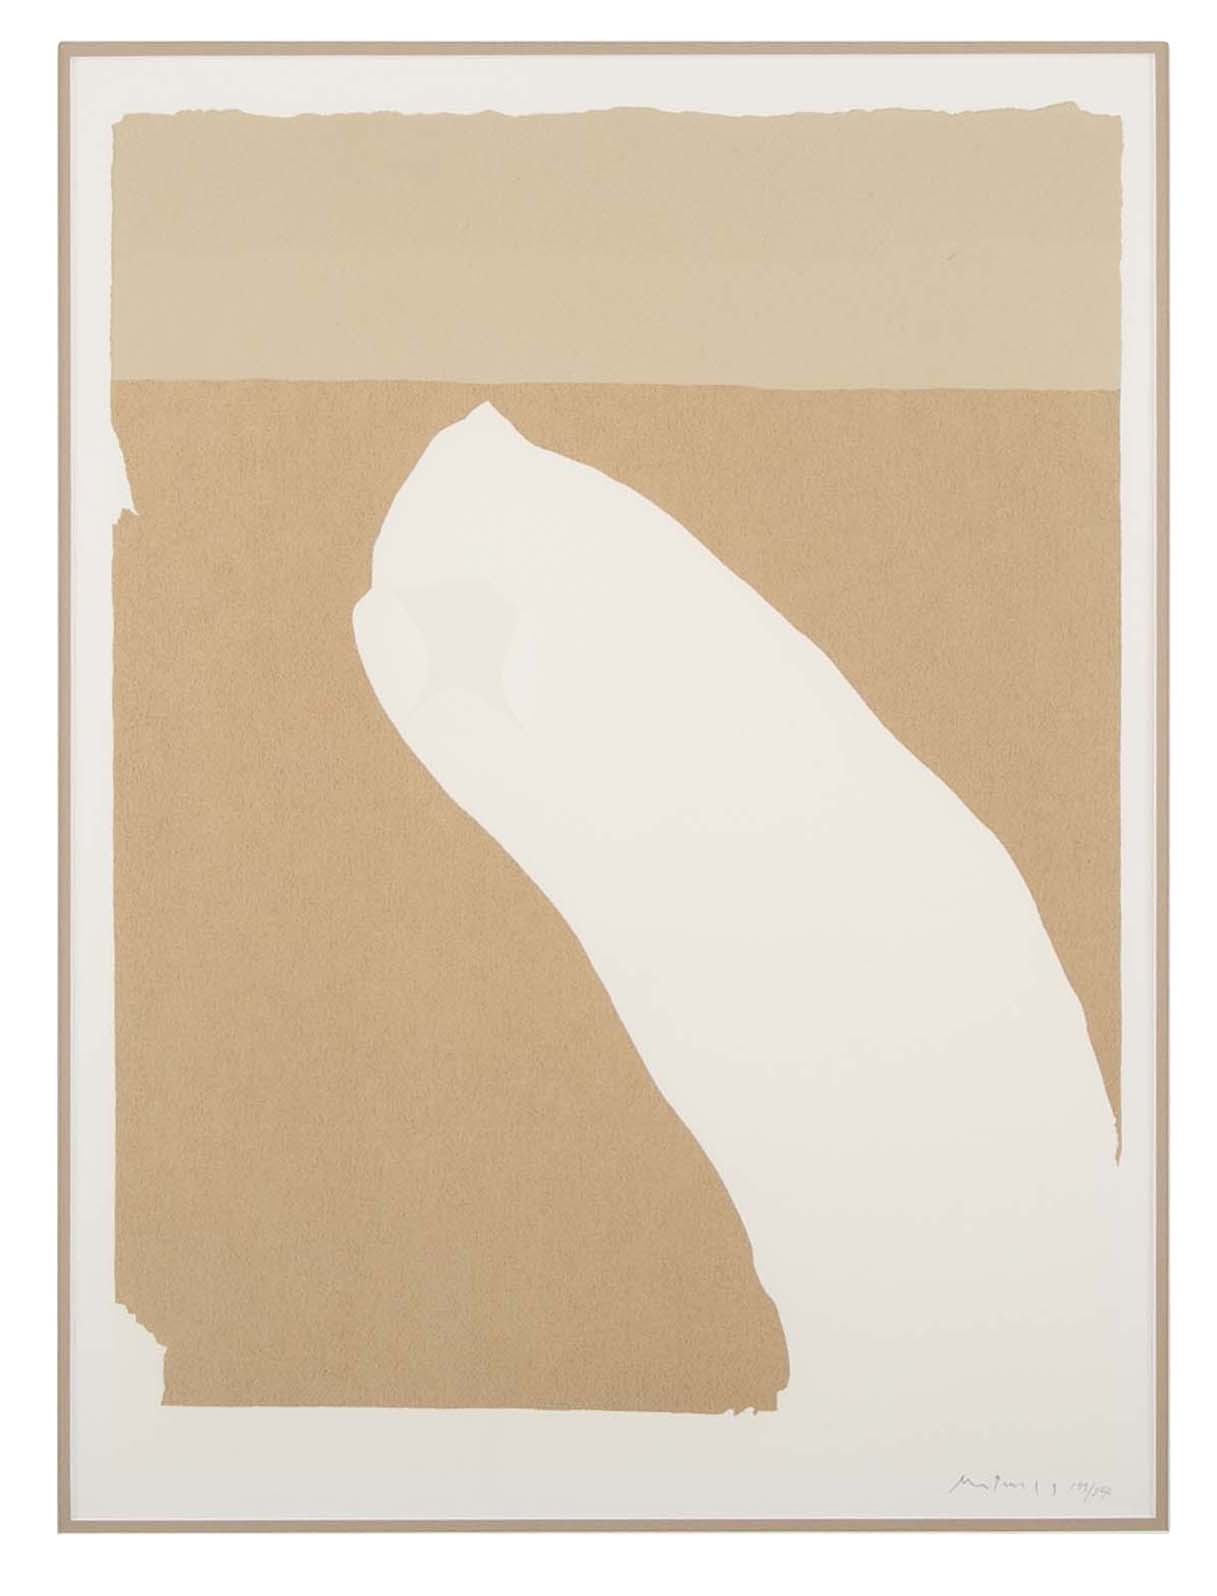 Untitled Serigraph by Robert Motherwell